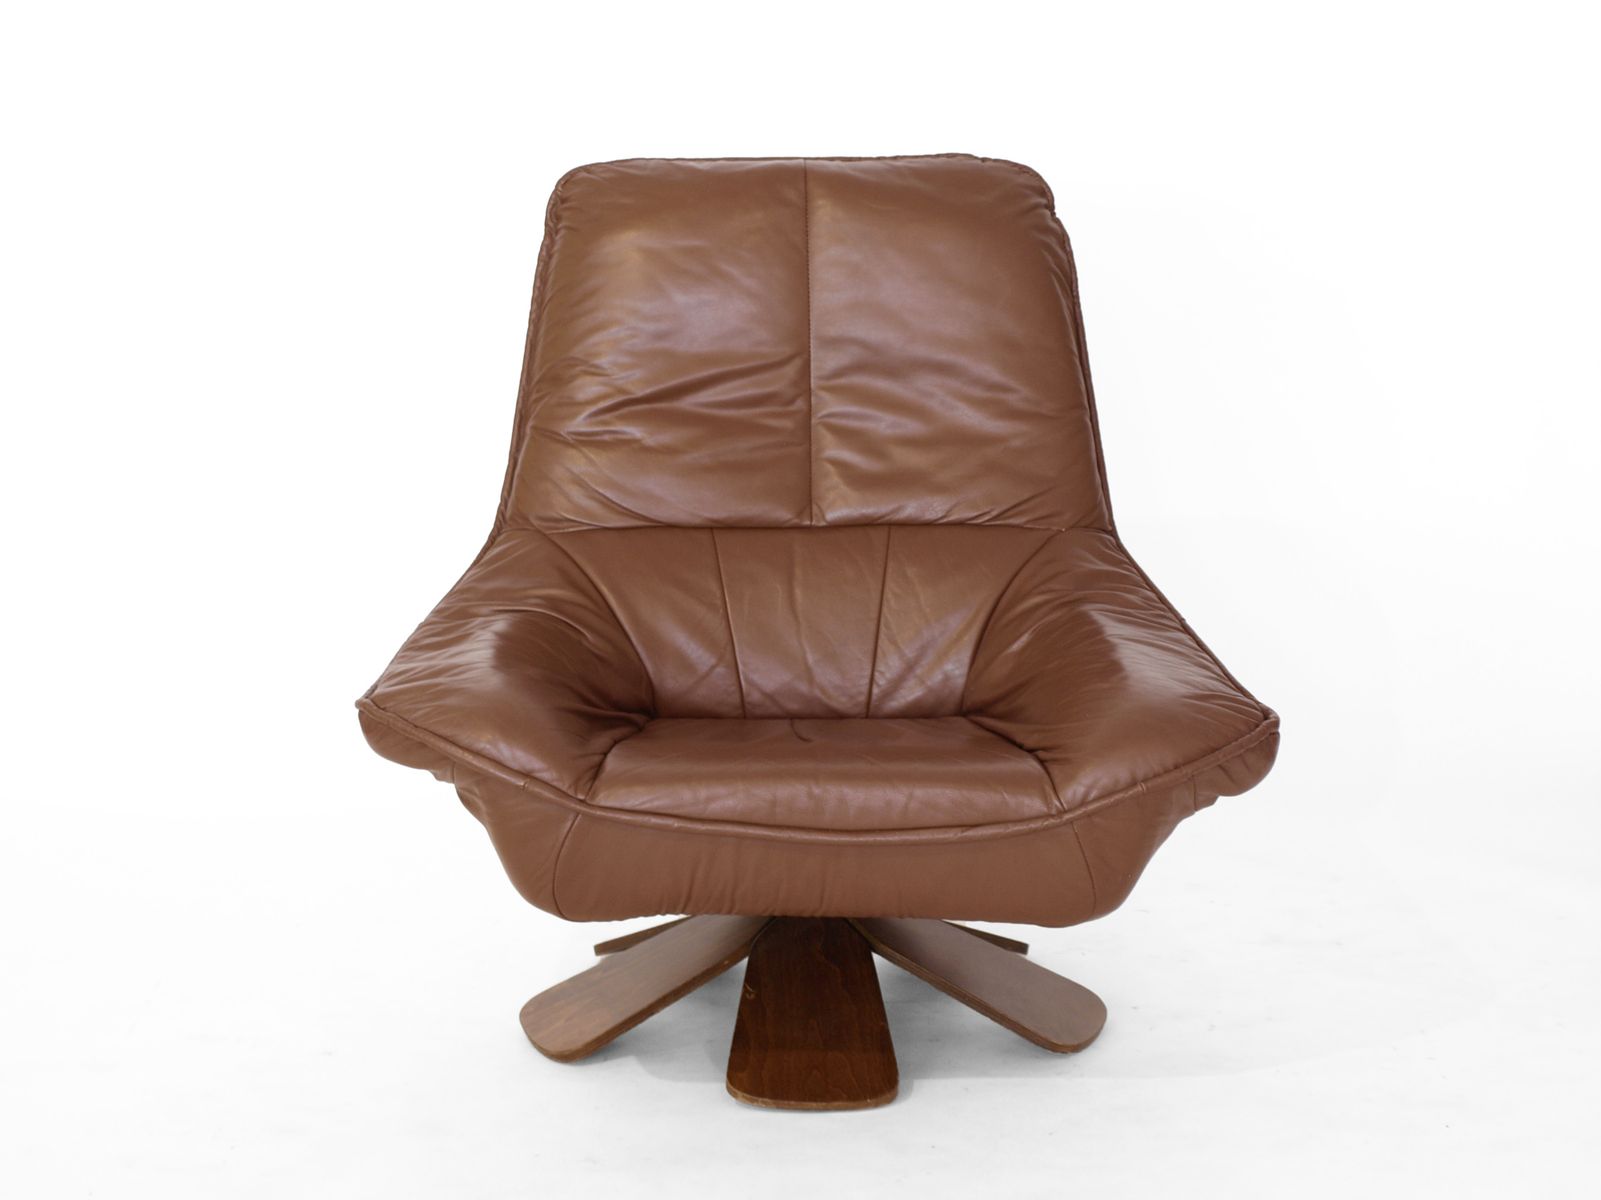 Vintage Leather Swivel Chair with Ottoman